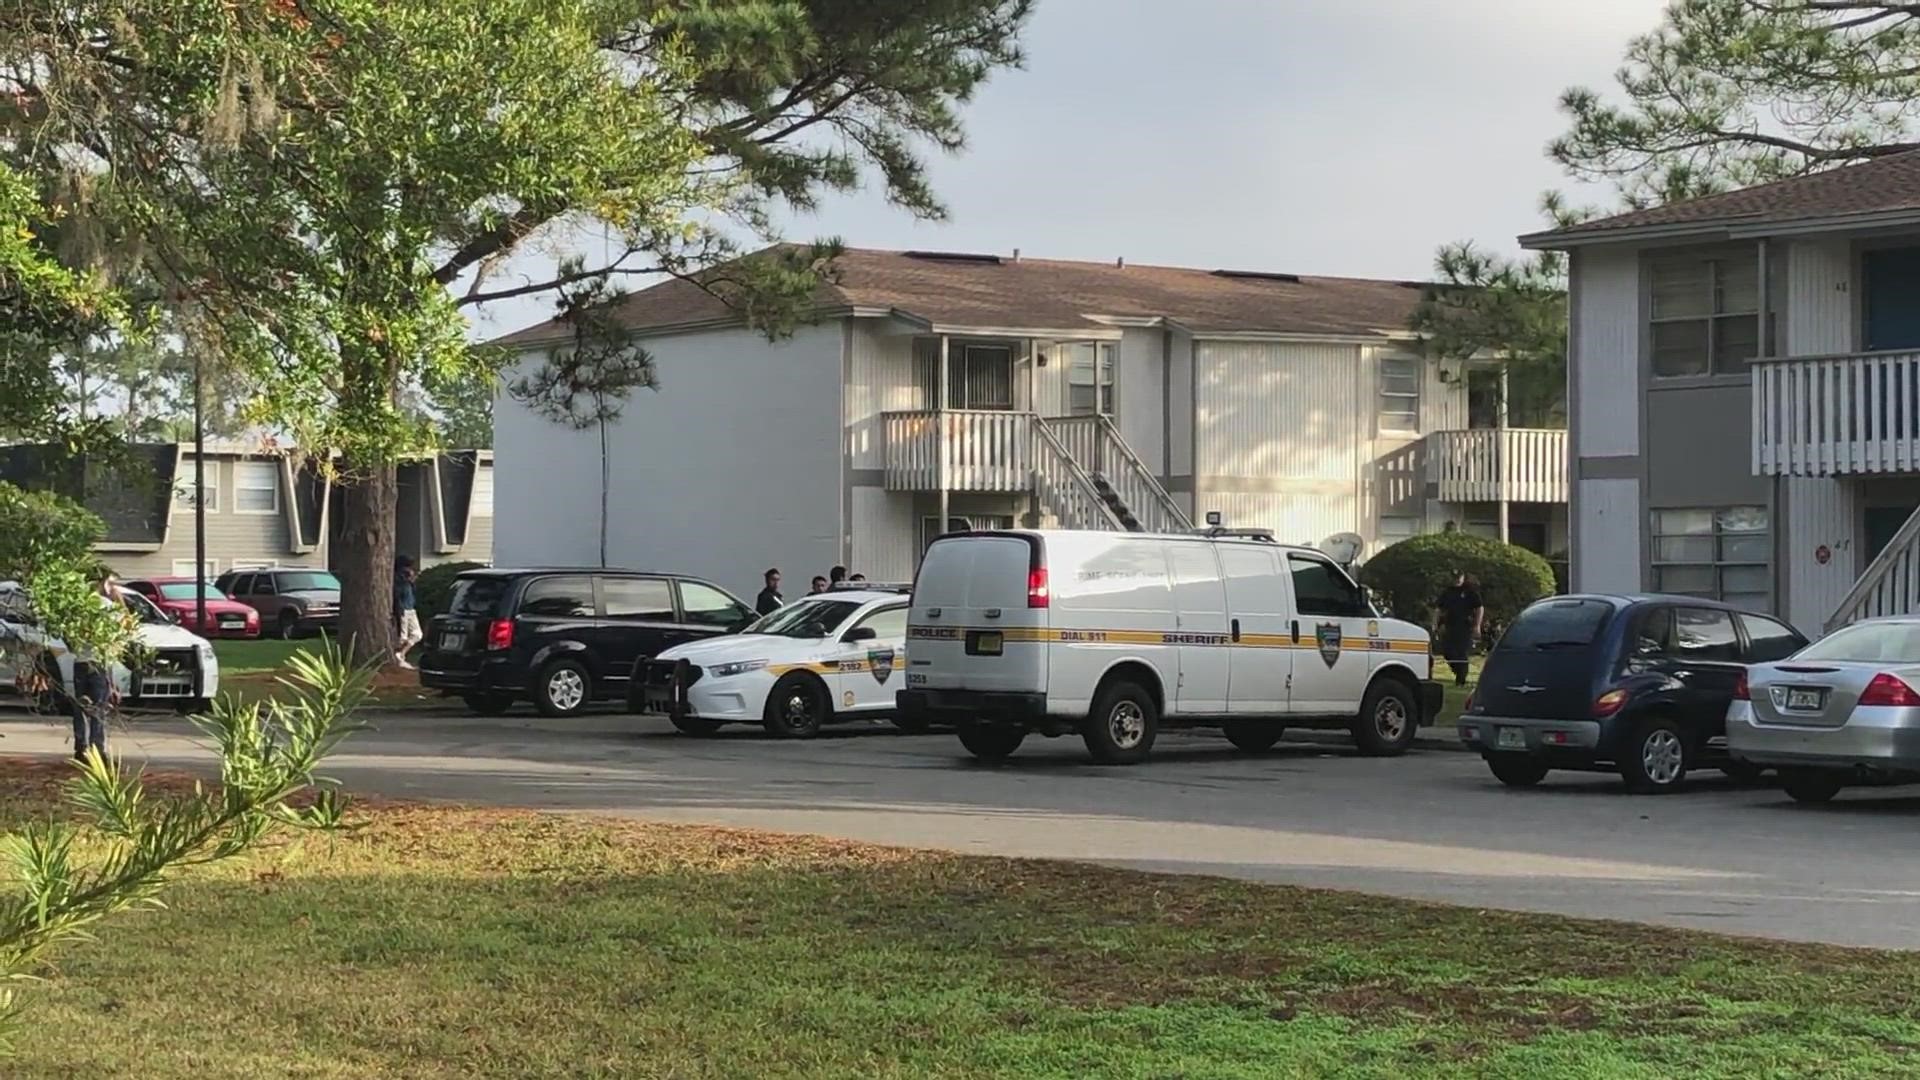 Jacksonville Fire Rescue Department confirmed they responded to the address for a drowning Thursday morning.
Credit: Renata Di Gregorio